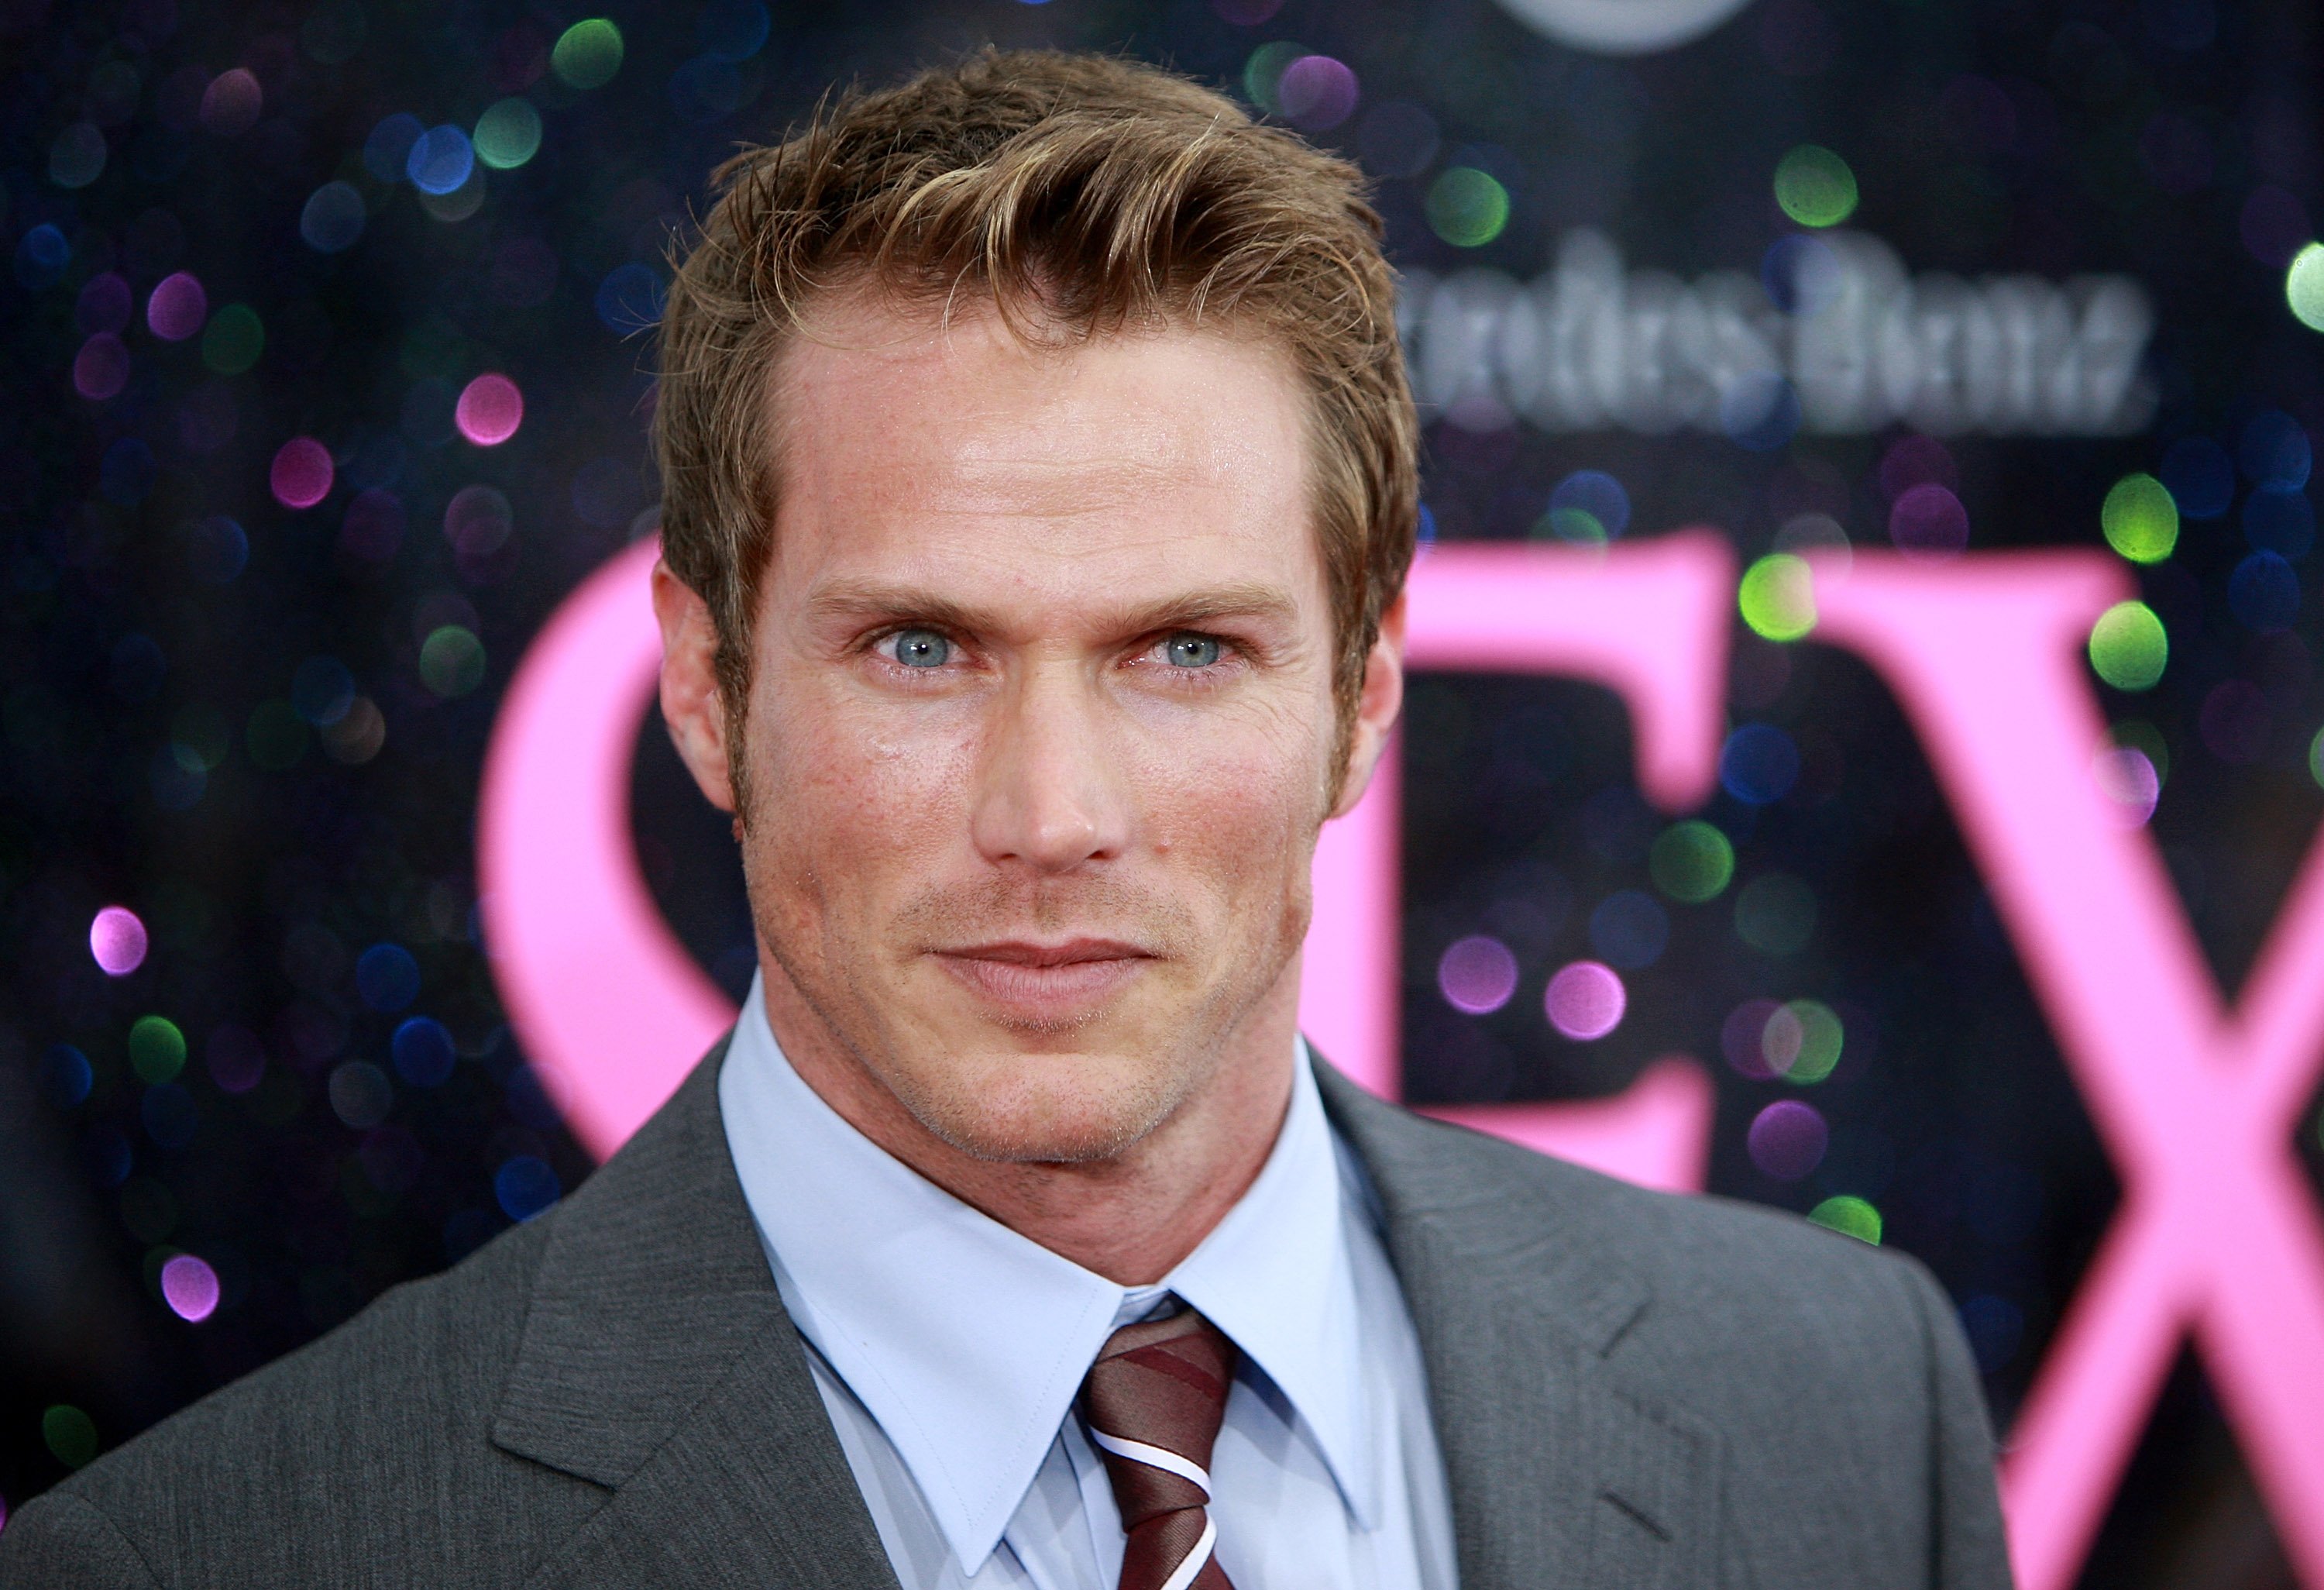 Jason Lewis attends the premiere of "Sex and the City: The Movie" at Radio City Music Hall on May 27, 2008